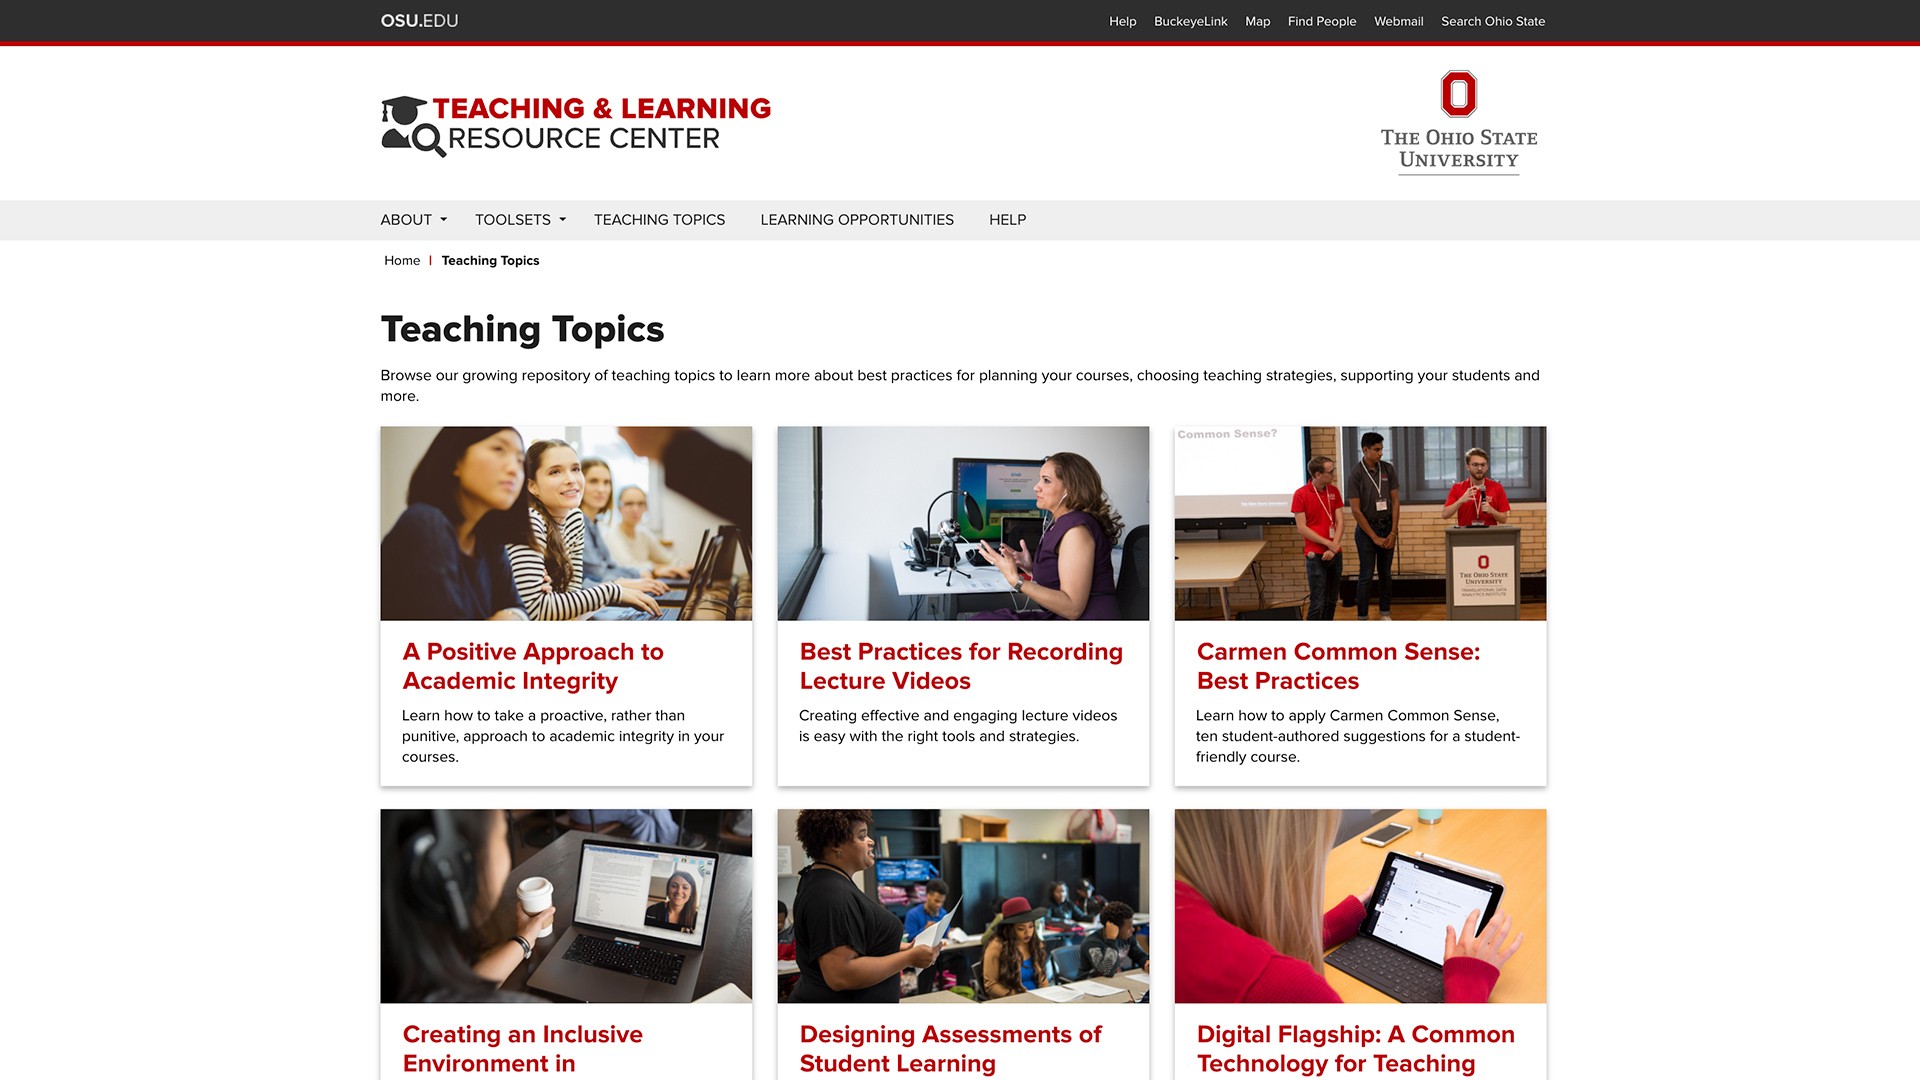 Teaching Topics page of the Teaching and Learning Resource Center